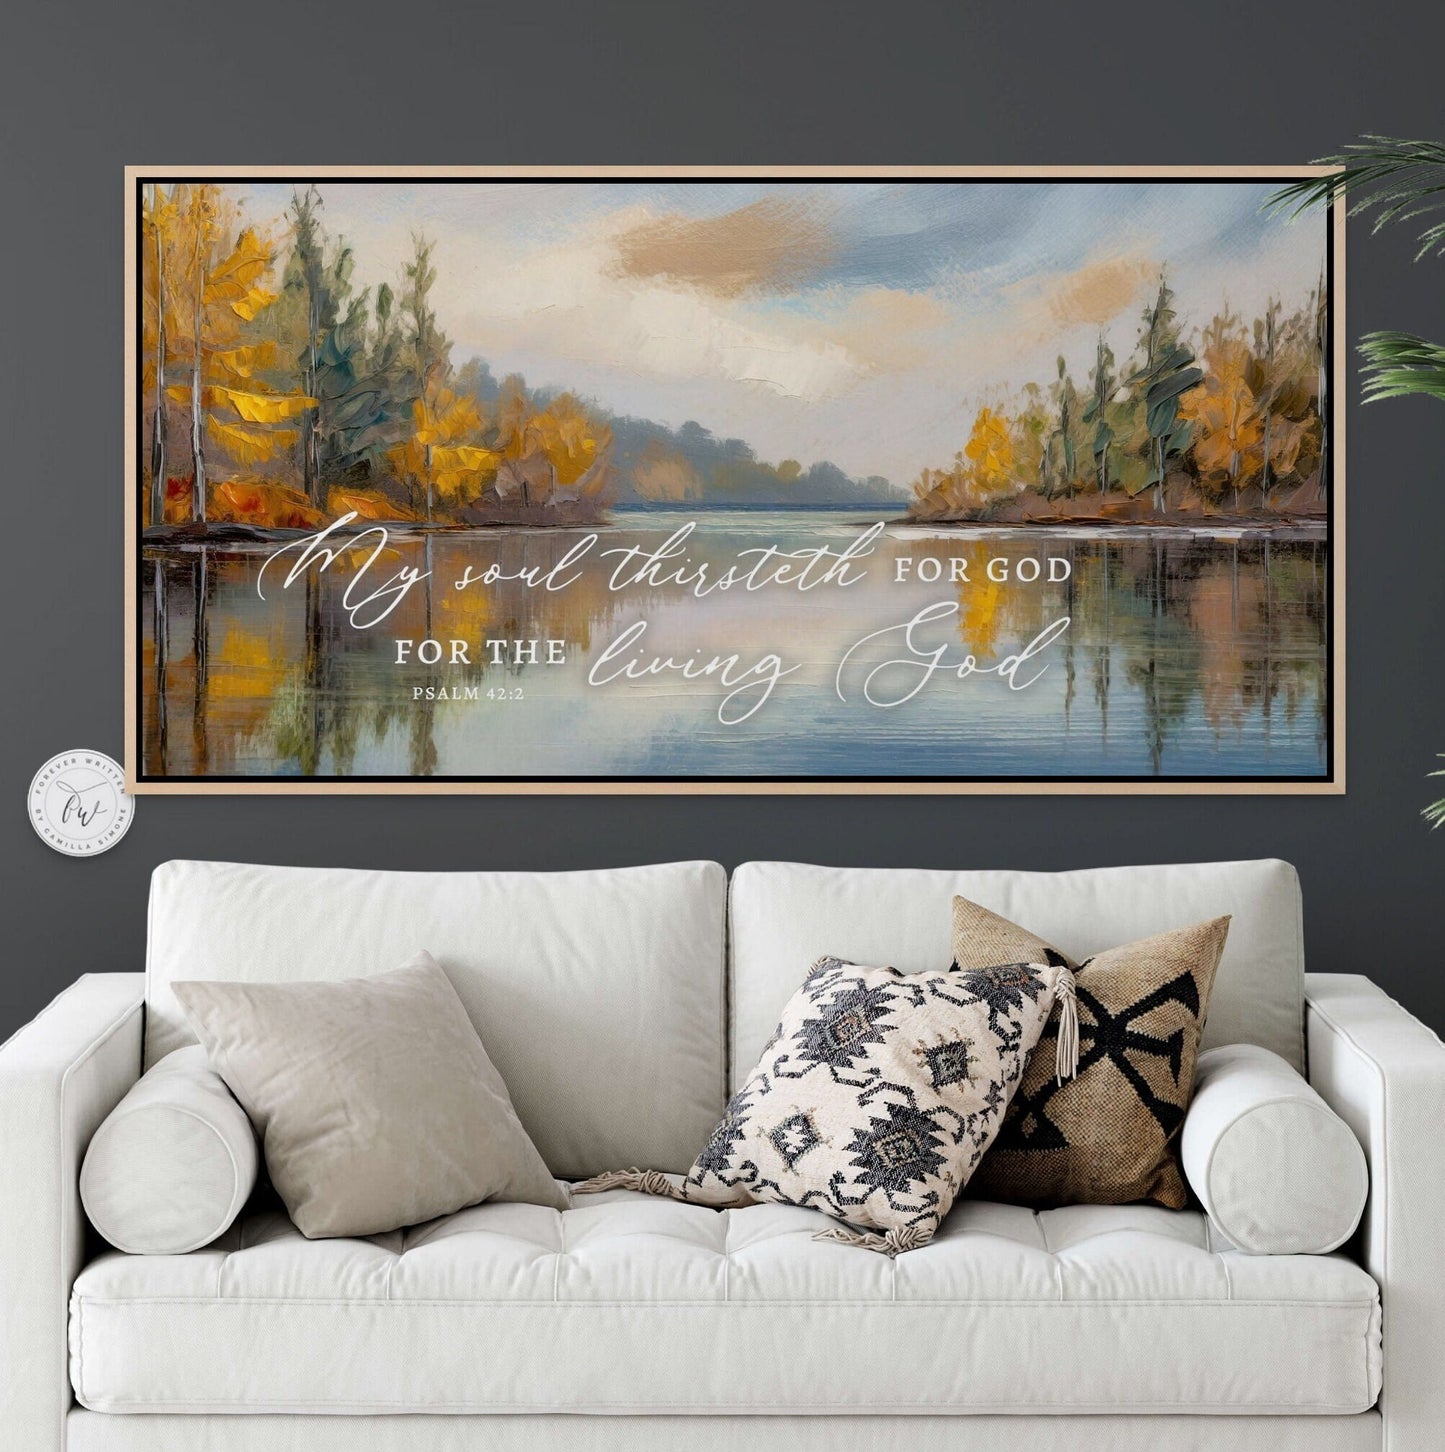 Our designs are wonderful for decorating your home! &quot;My soul thirsteth for God, for the living God&quot; Psalm 42:2 Autumn lake painting, printed on canvas Designed by Camilla Simone